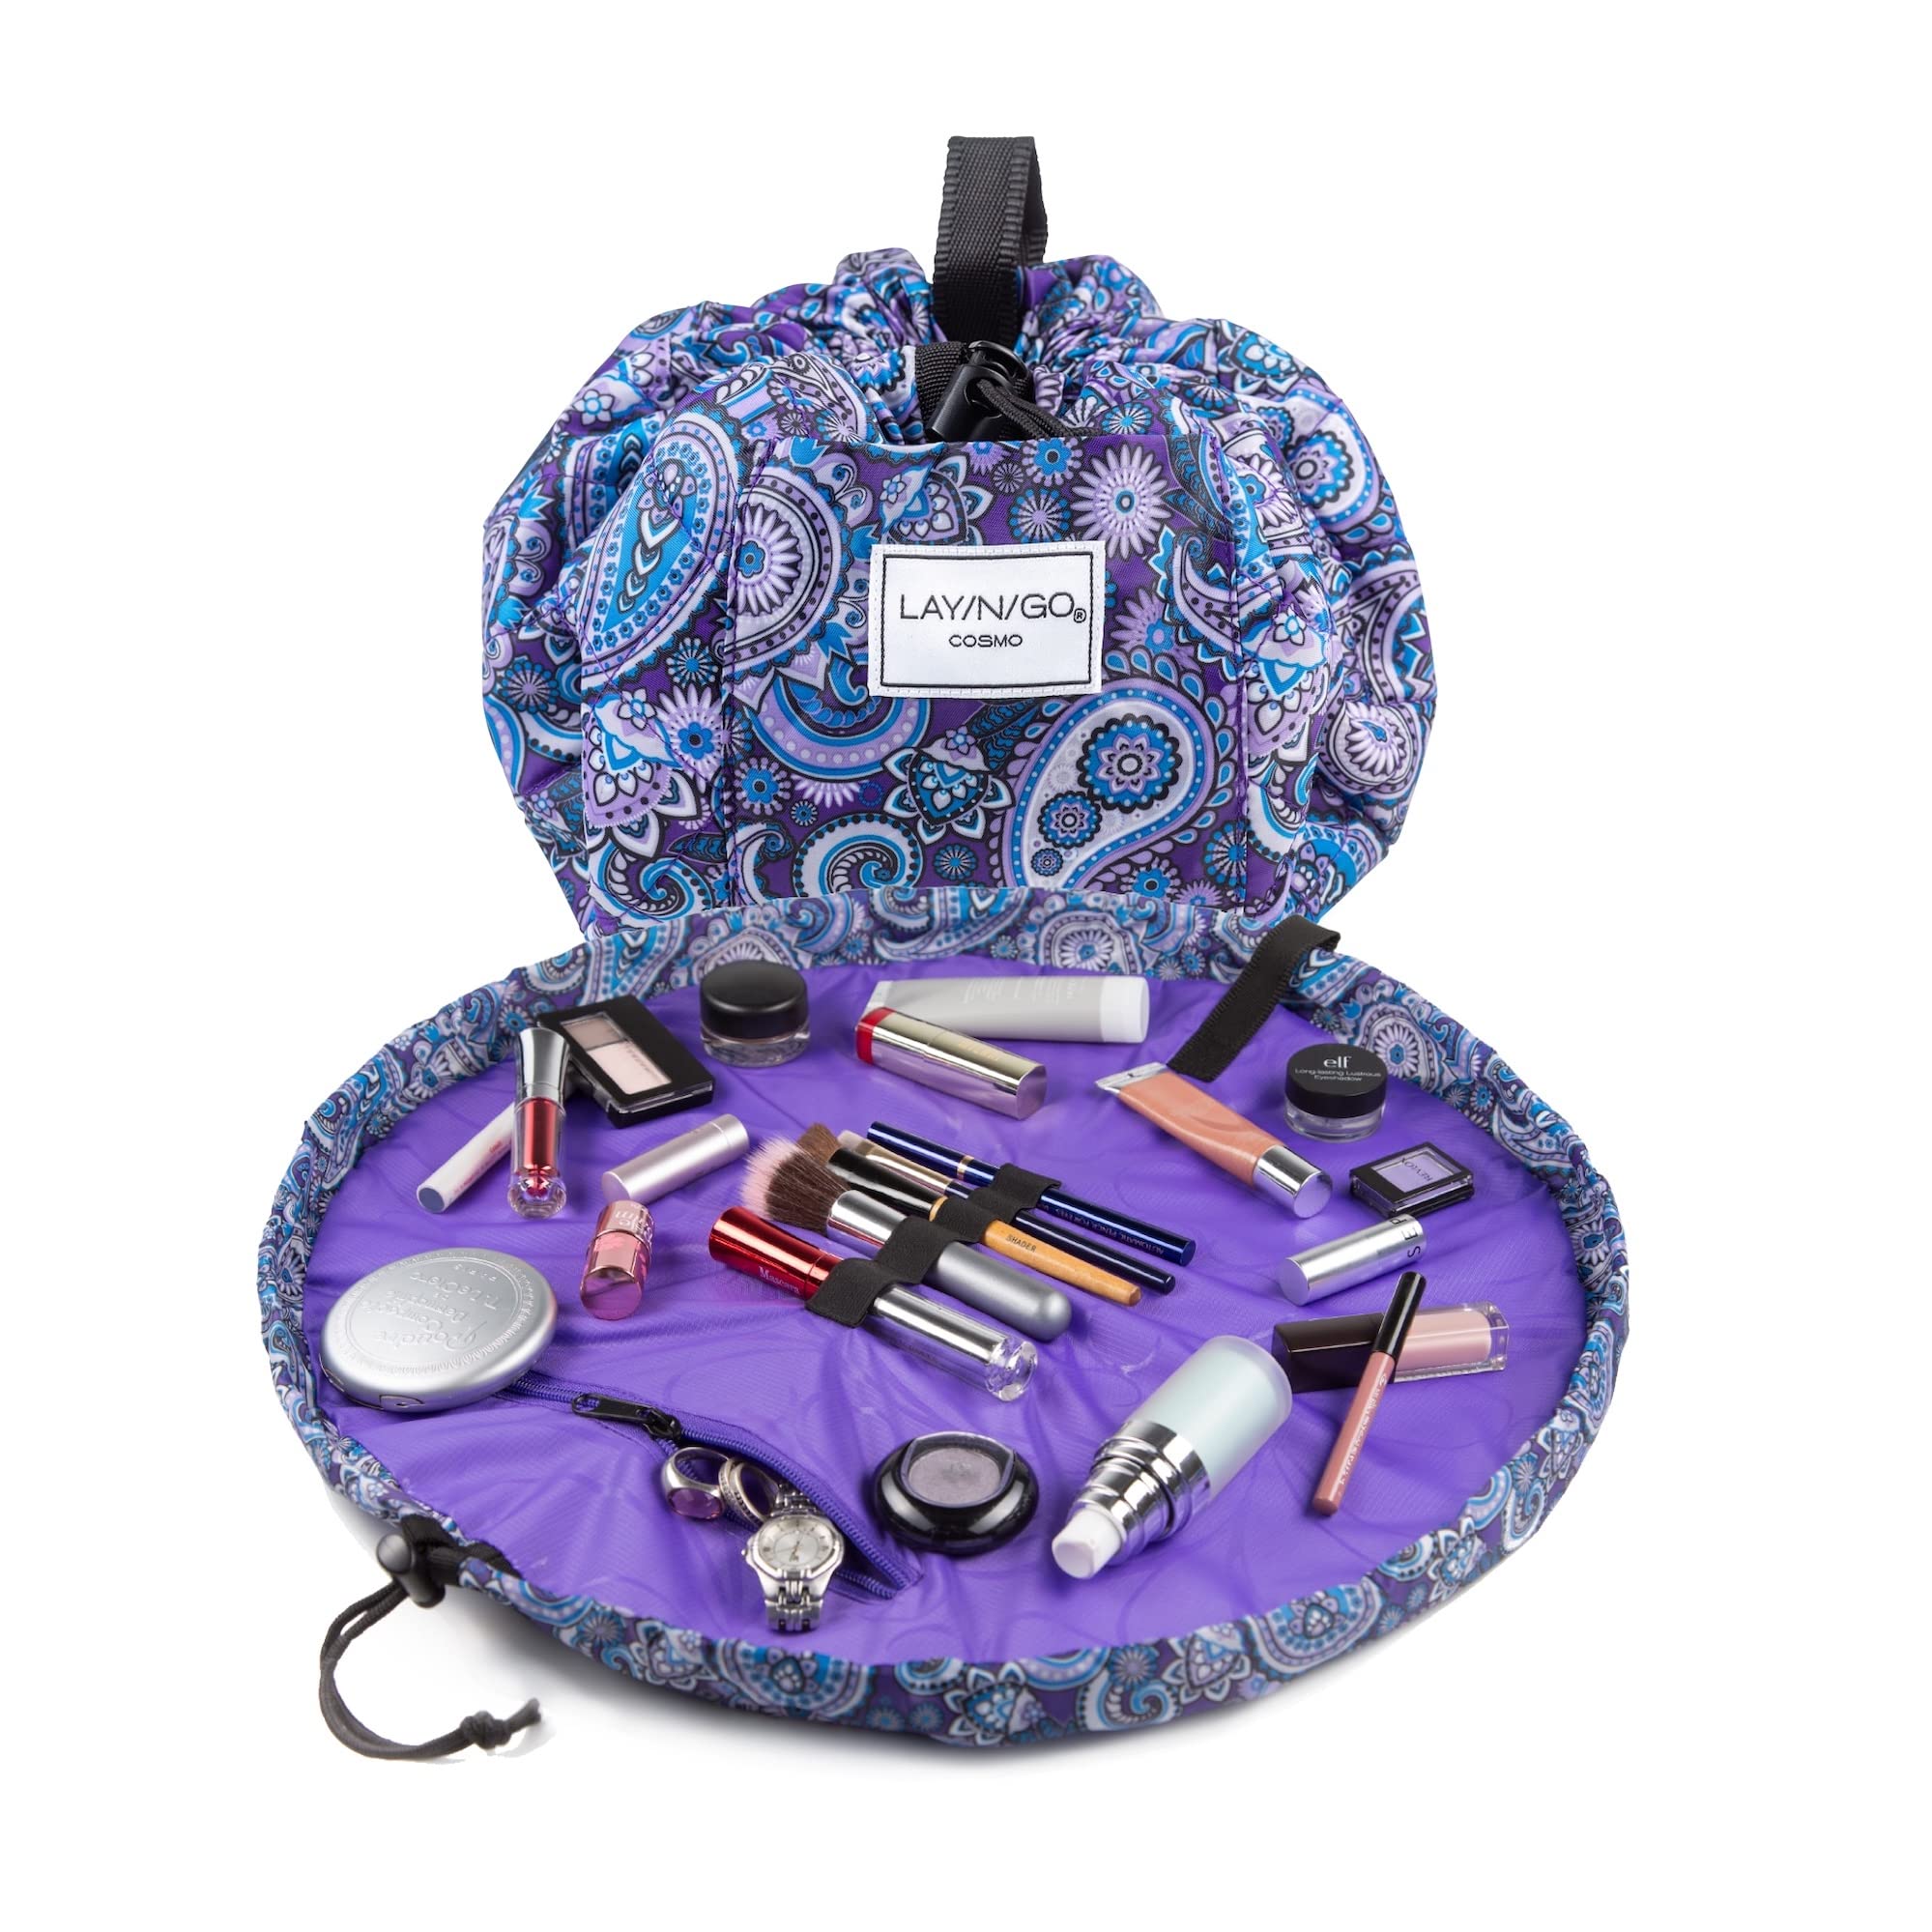 Lay-n-Go Cosmo Drawstring Makeup Organizer Cosmetic & Toiletry Bag for Travel, and Daily Use with a Durable Patented Design, 20 inch, Purple Paisley + Purple